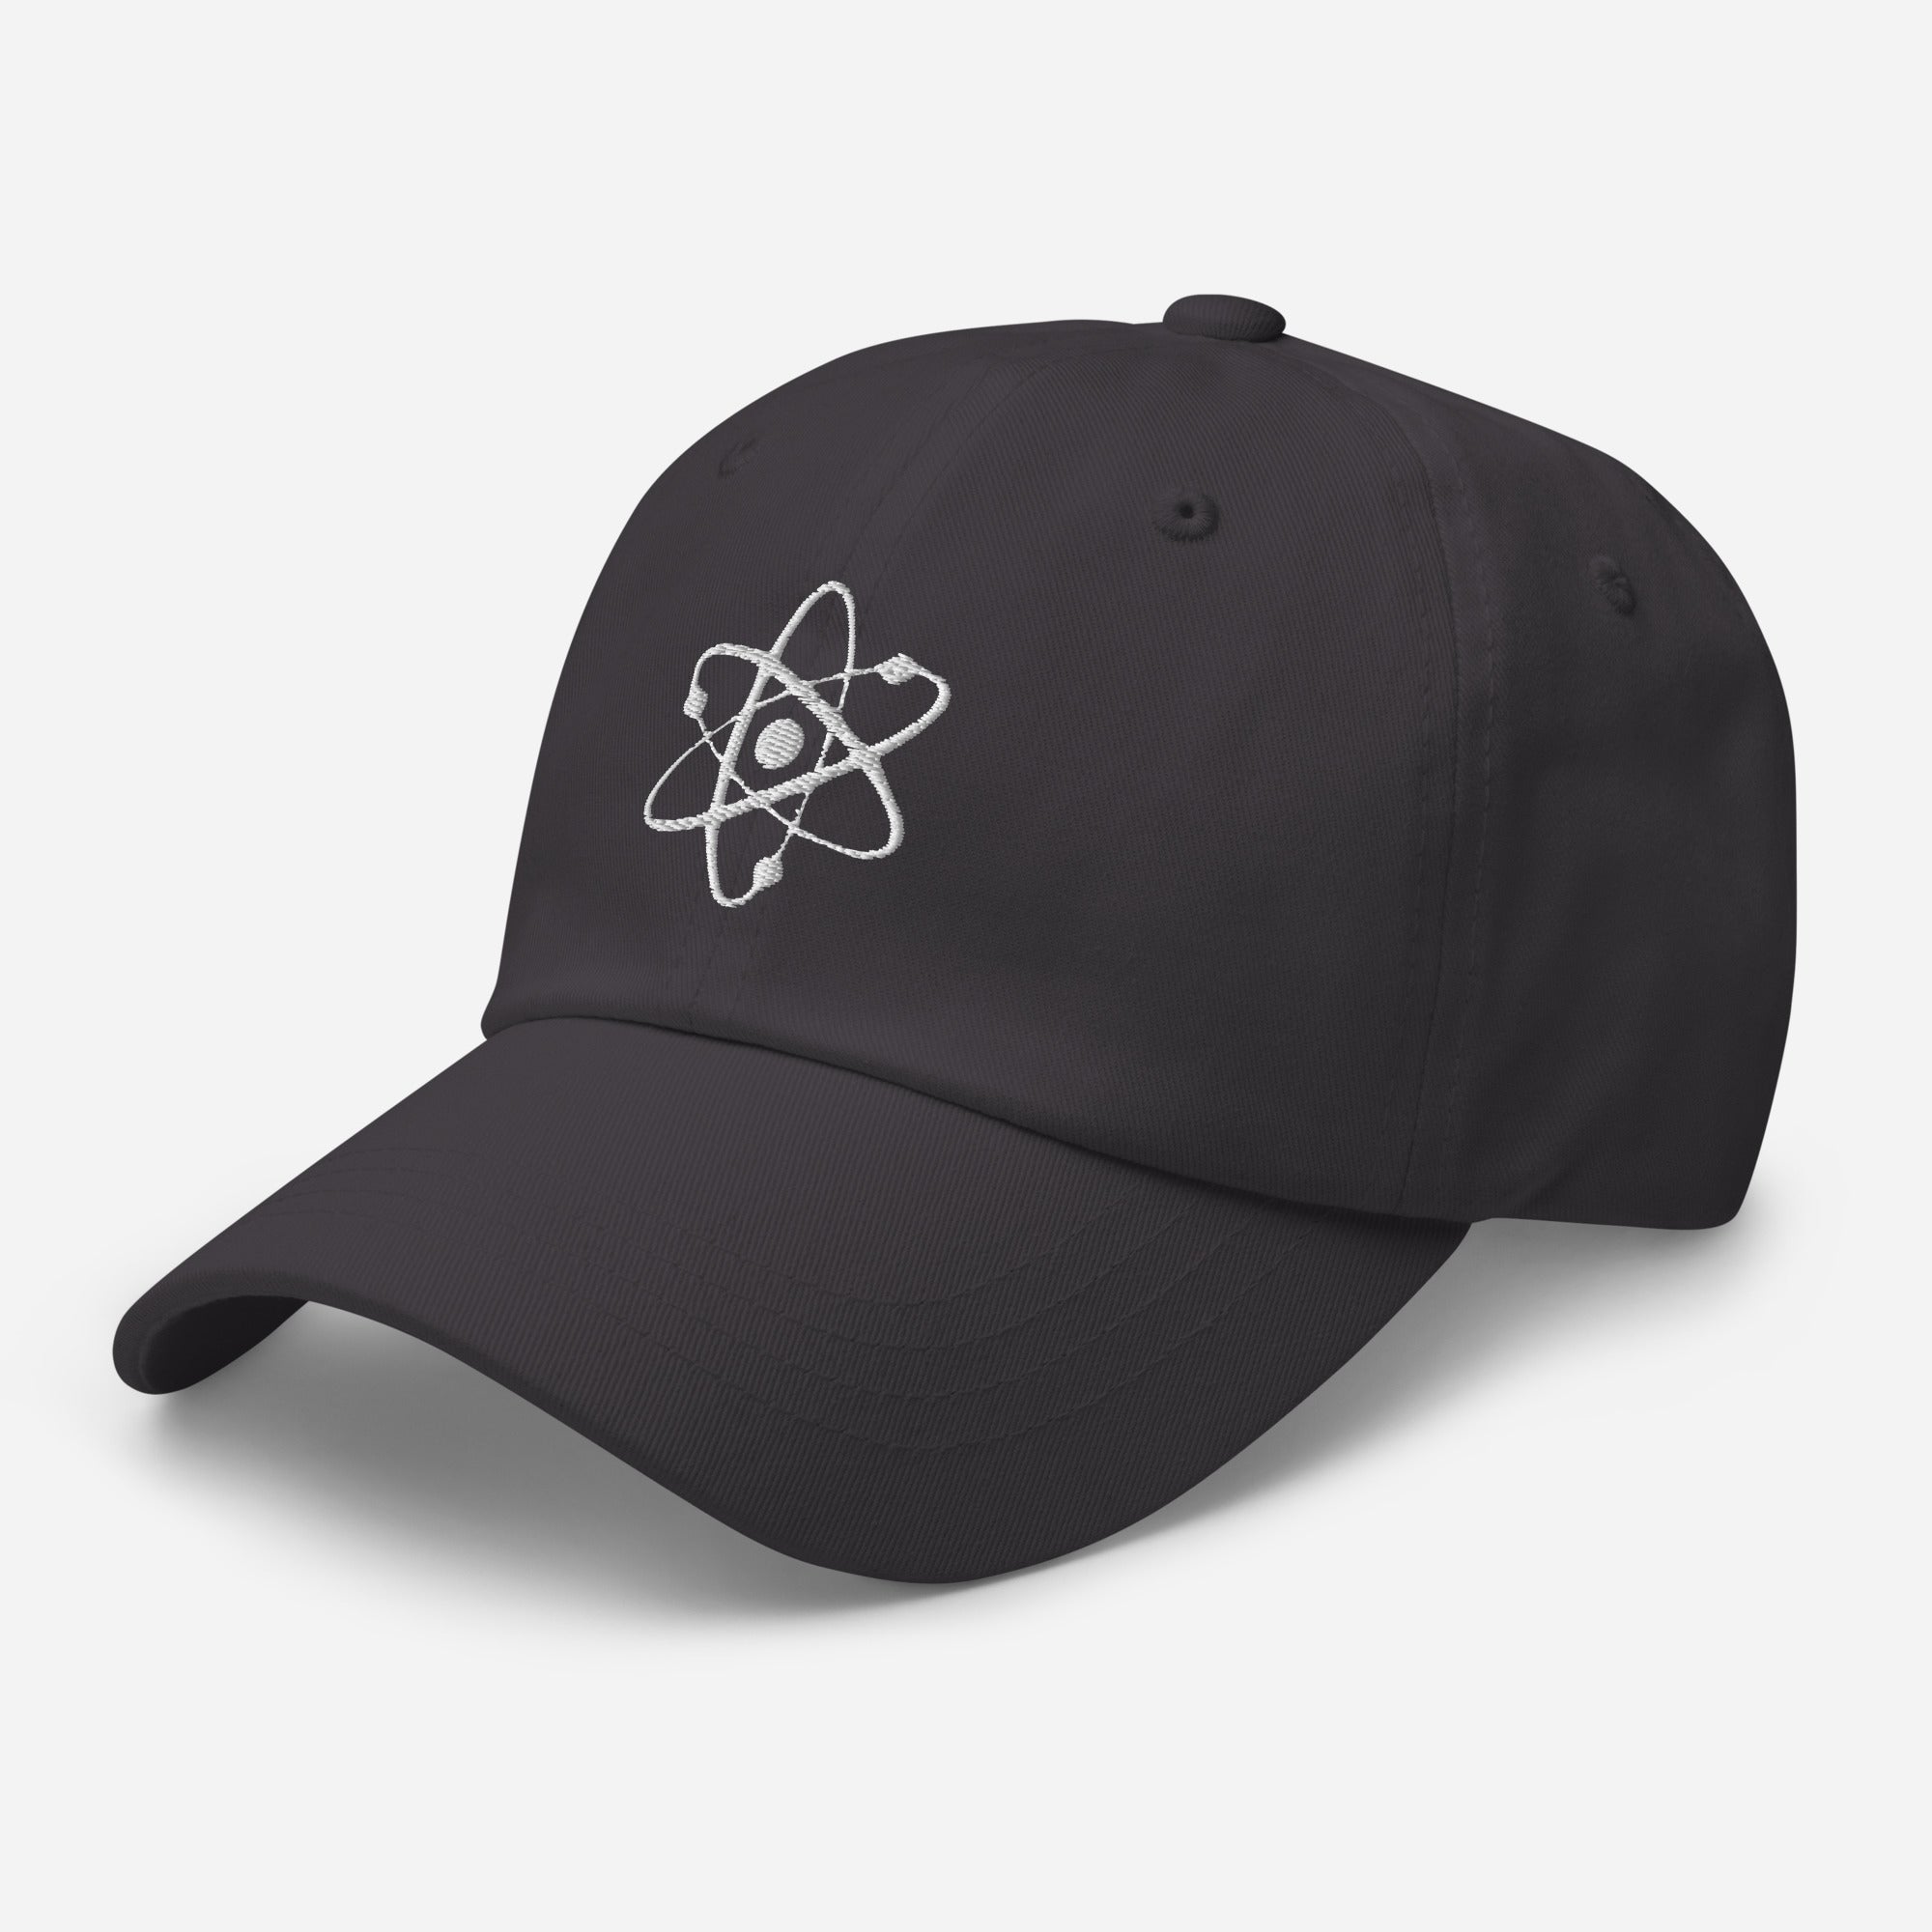 Atomic Nucleus Symbol Nuclear Power Embroidered Baseball Cap Dad hat